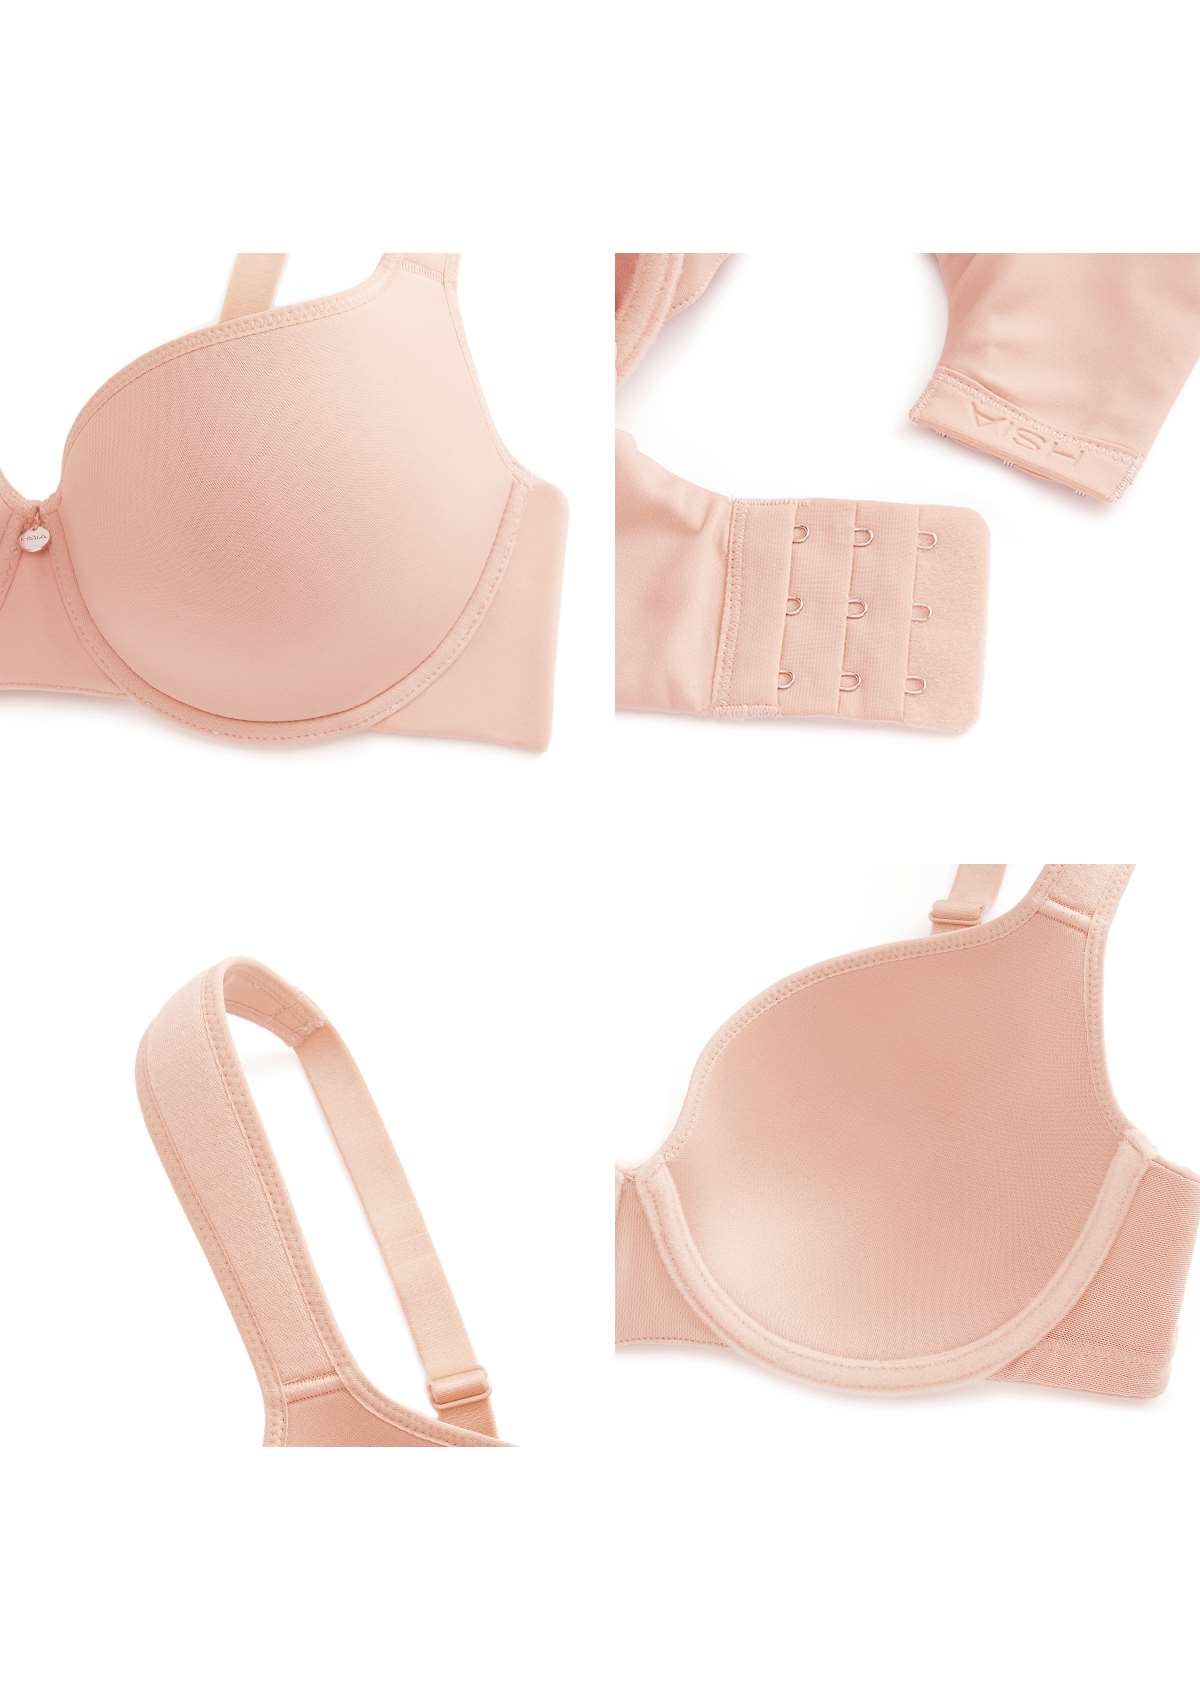 HSIA Patricia Smooth Classic T-shirt Lightly Padded Minimizer Bra - Light Pink / 46 / D